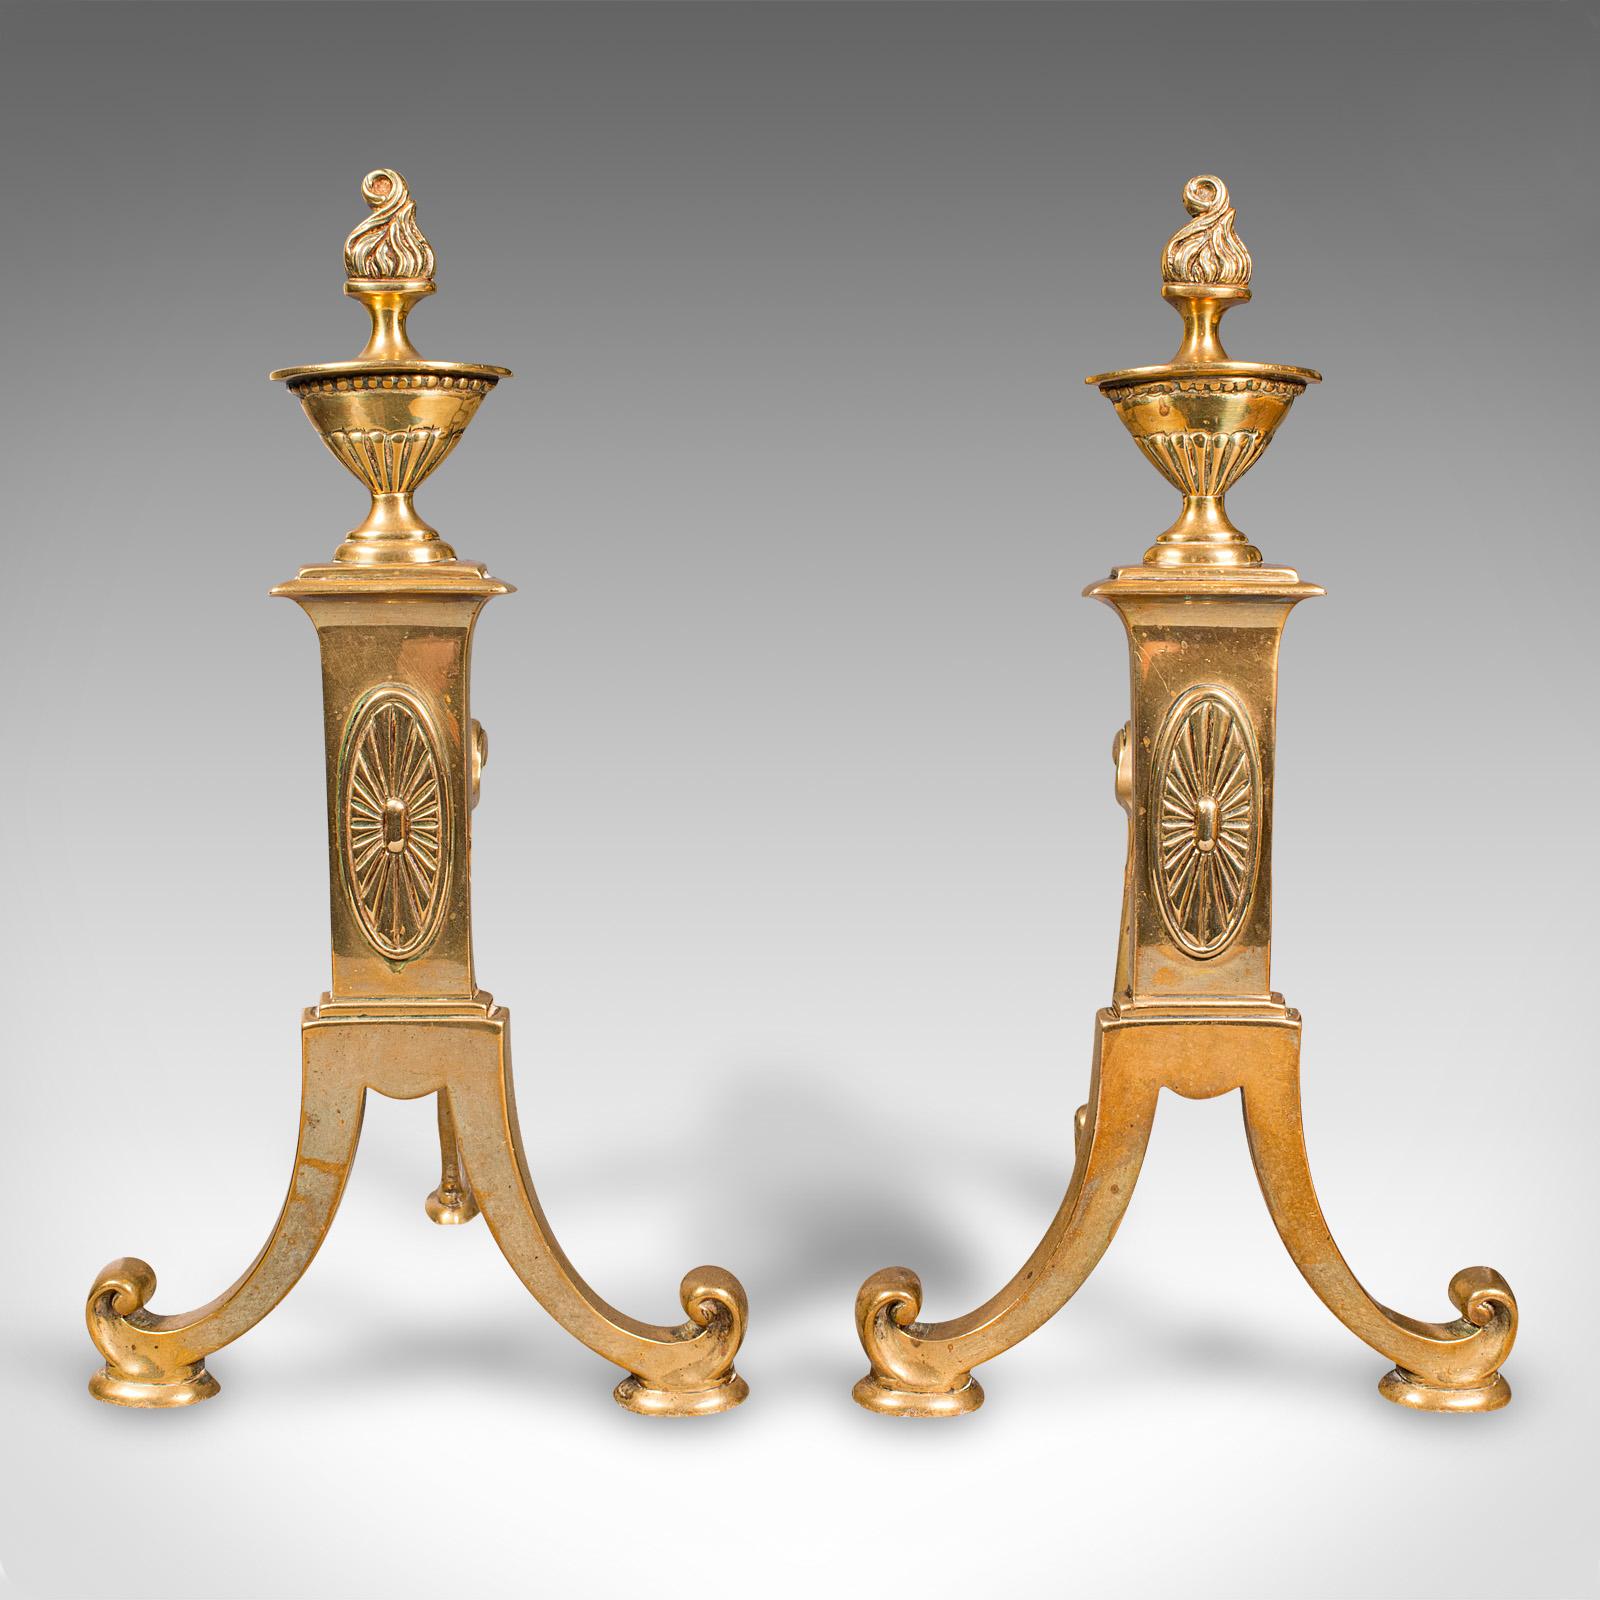 This is a pair of antique decorative fireside tool rests. An English, brass andiron or fire dog, dating to the early Victorian period, circa 1840.

Elegant decorative appeal and of great color
Displaying a desirable aged patina and in good